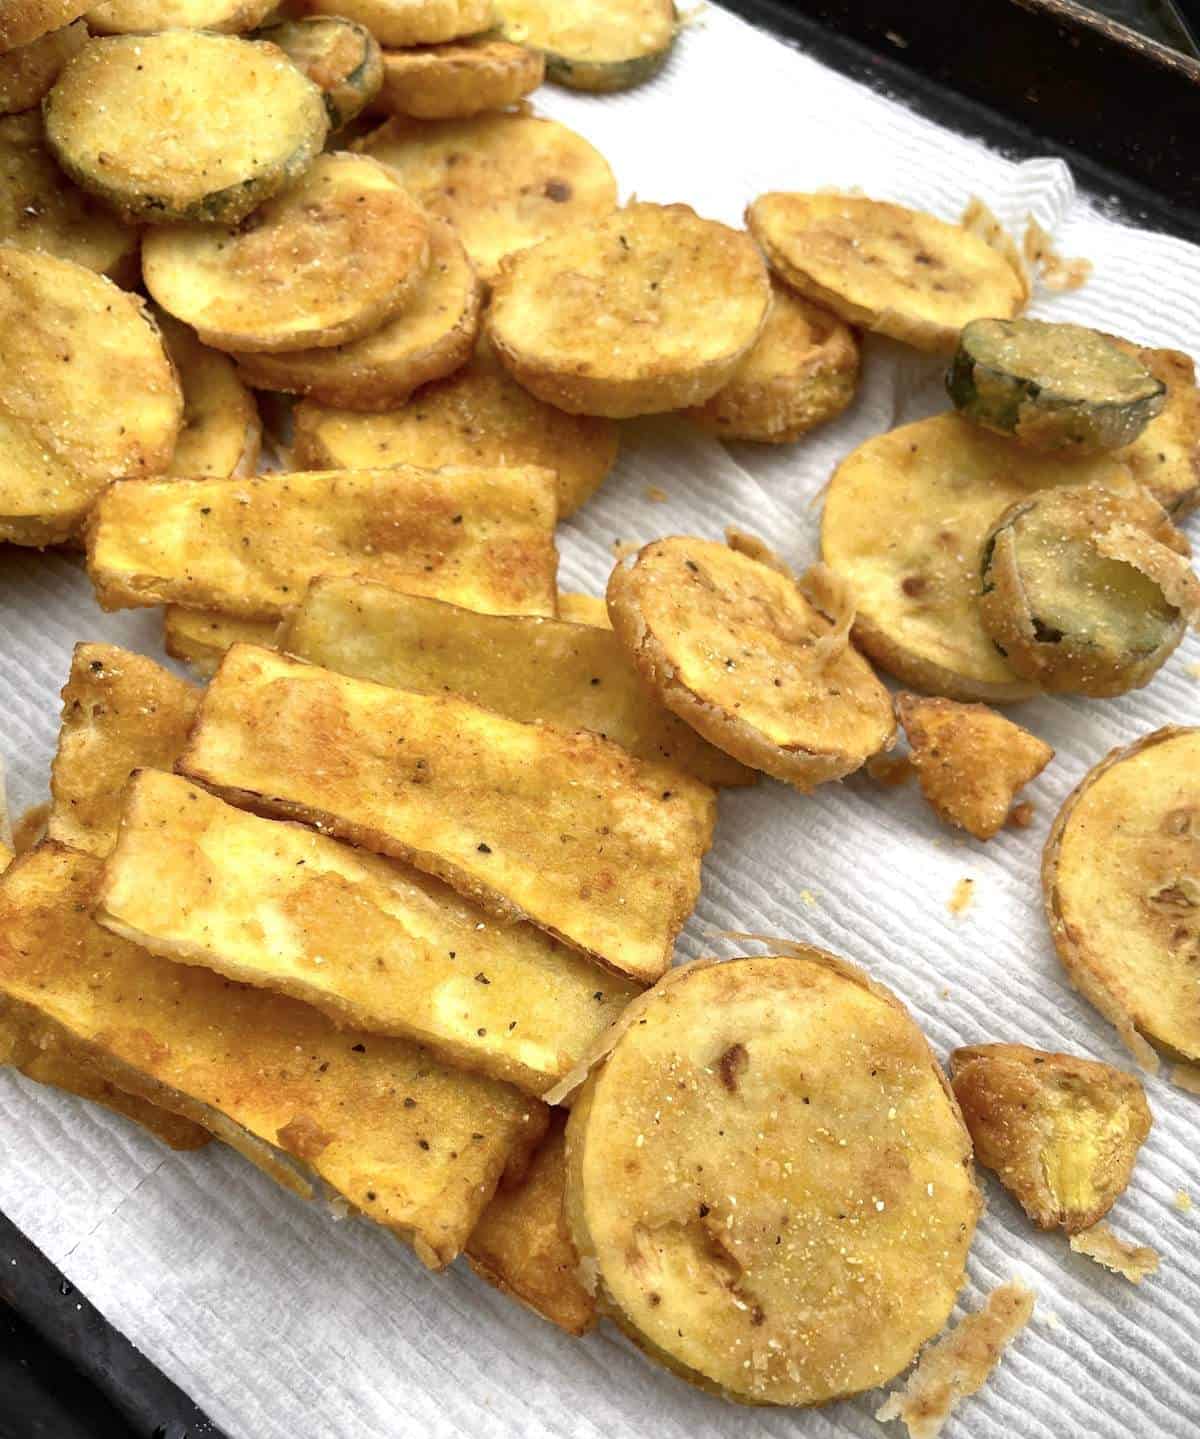 Fried squash strips and slices draining on a paper towel.